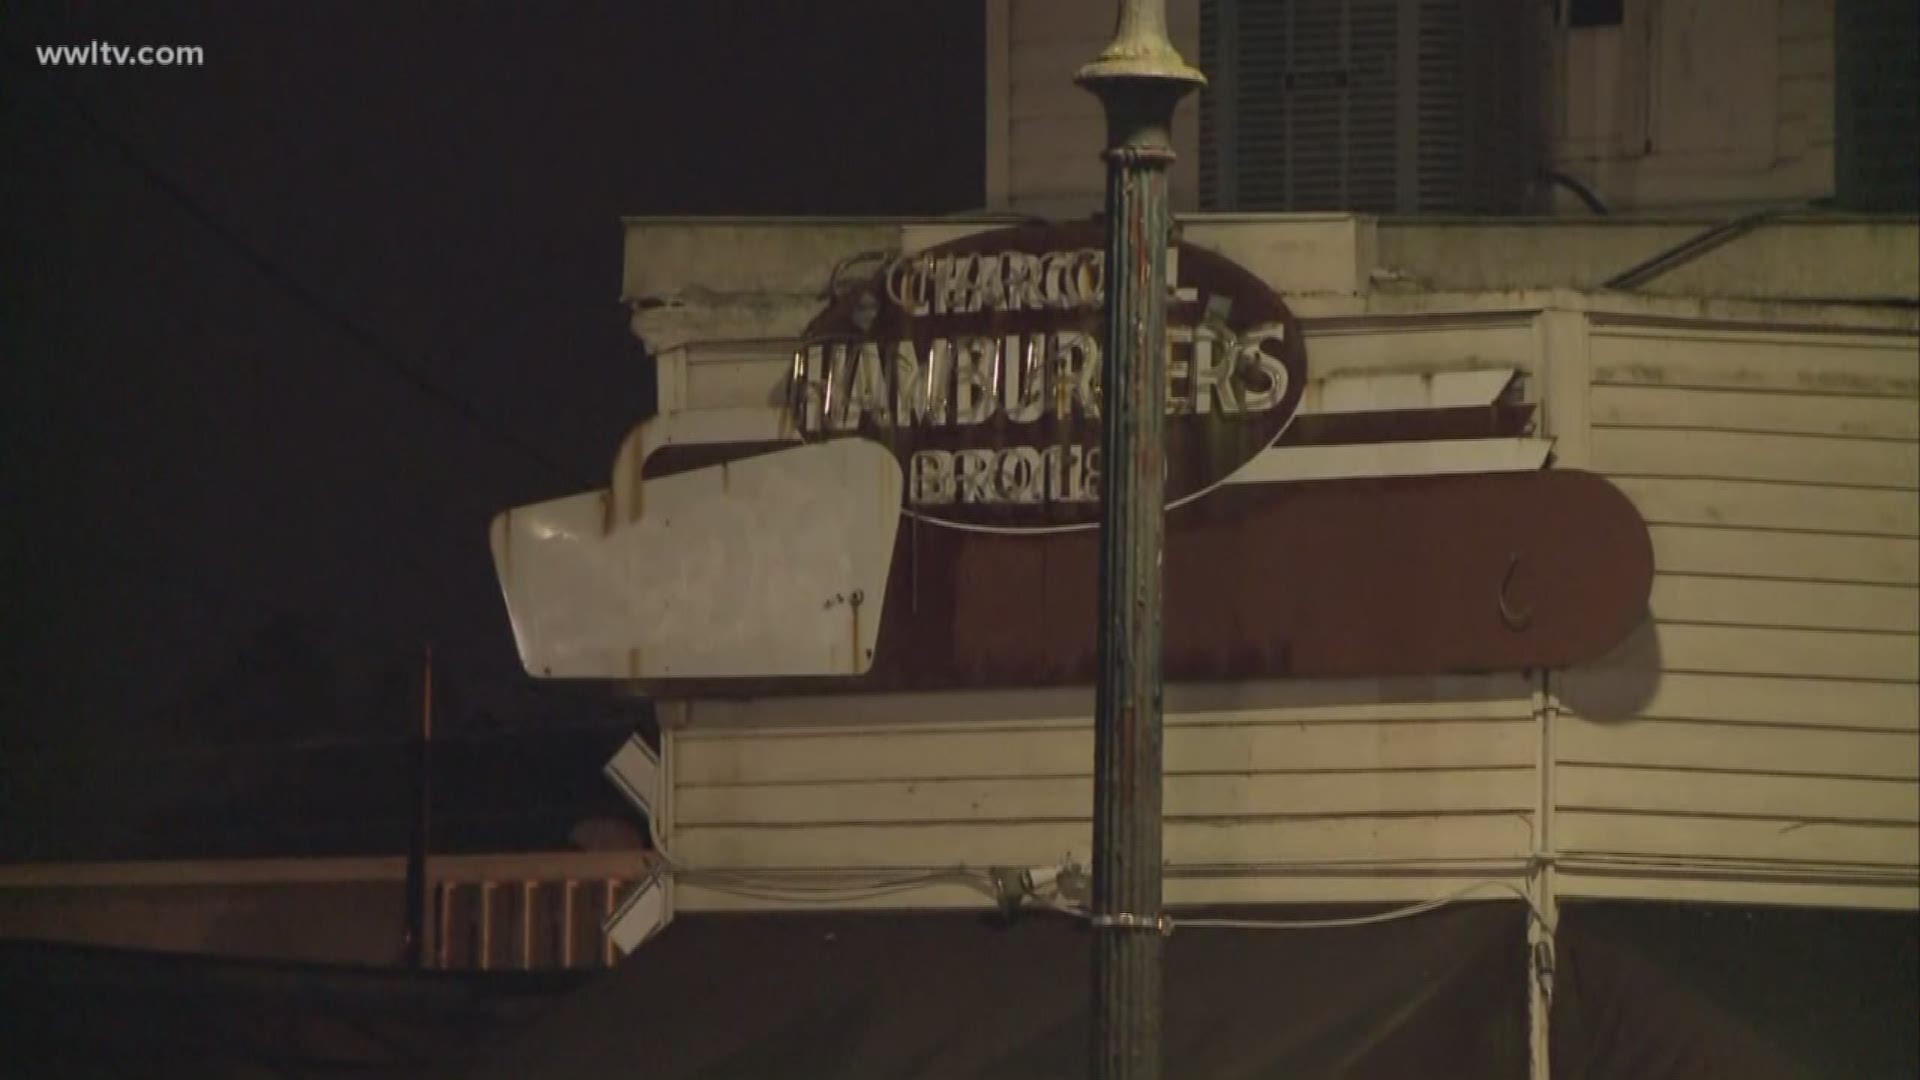 The iconic Bud's Broiler sign on City Park Avenue is now covered, reading only: Charcoal hamburgers broiled.